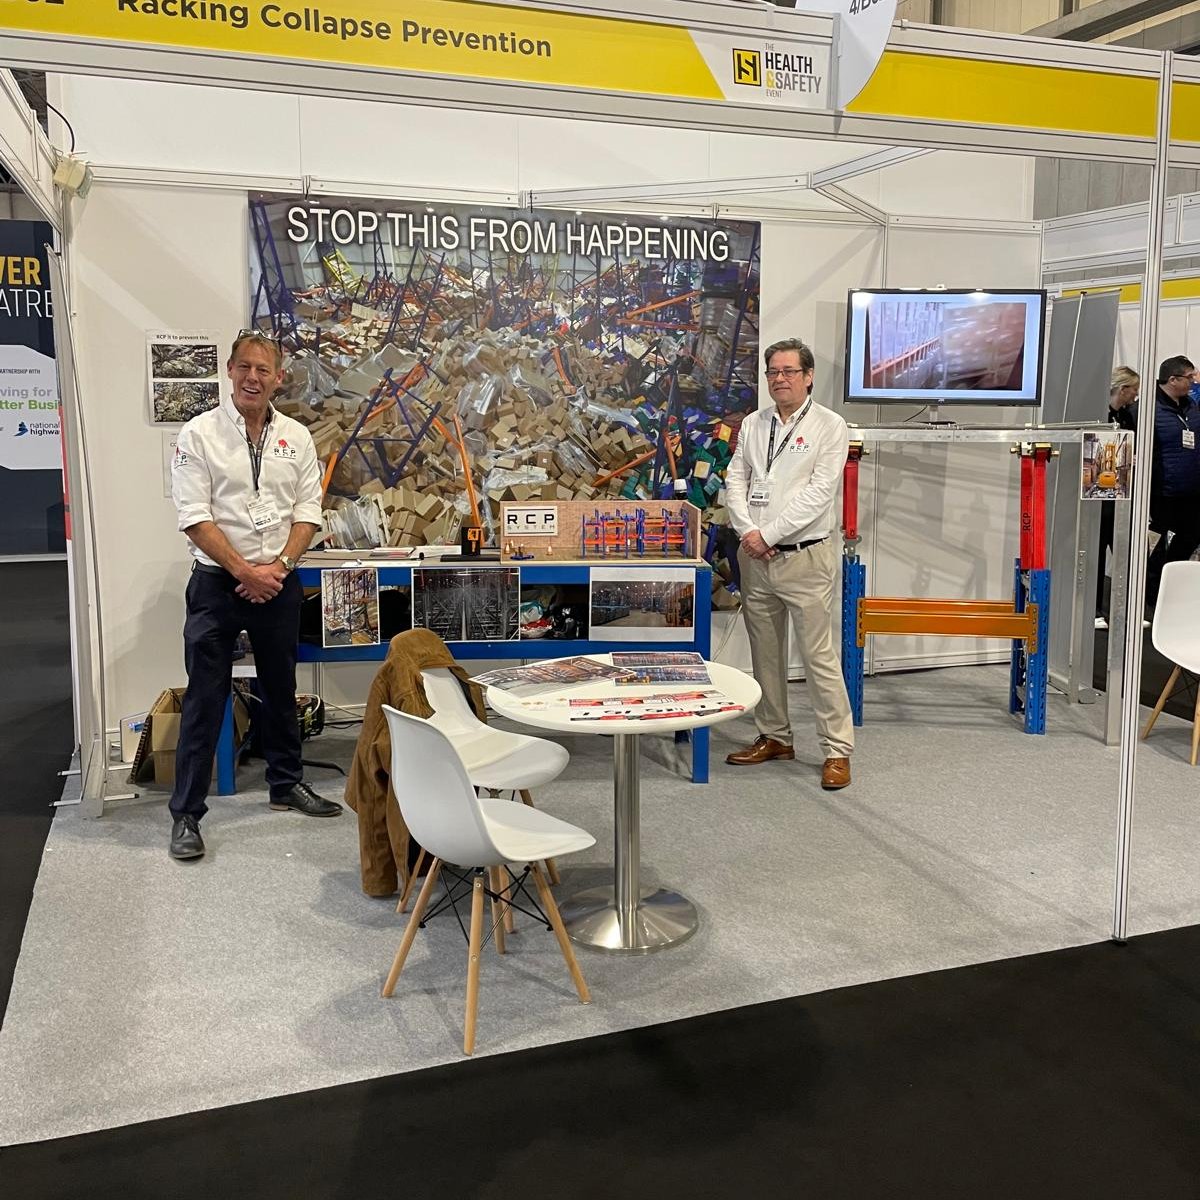 Wow! 3-days @HandS_Events has been amazing. As we wrap interest has blown us away & if we missed U give us a call: rcpsystem.com
#rackingsafety #safety #warehousesafety #keepingteamssafe #palletracking #warehouse #supplychain #logistics #safetysolution #HSE2024